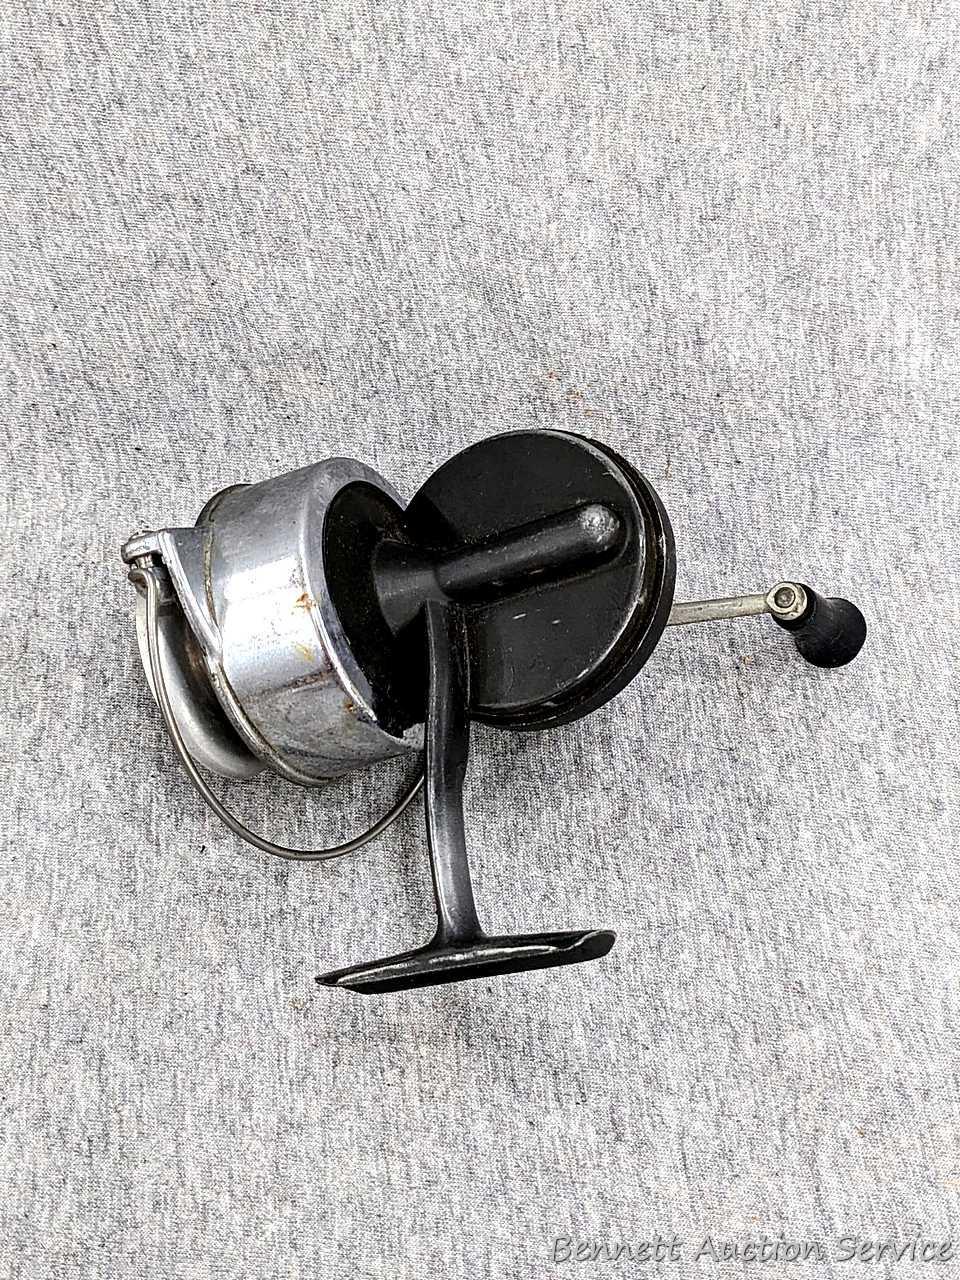 Open and closed fishing reels incl vintage Bache